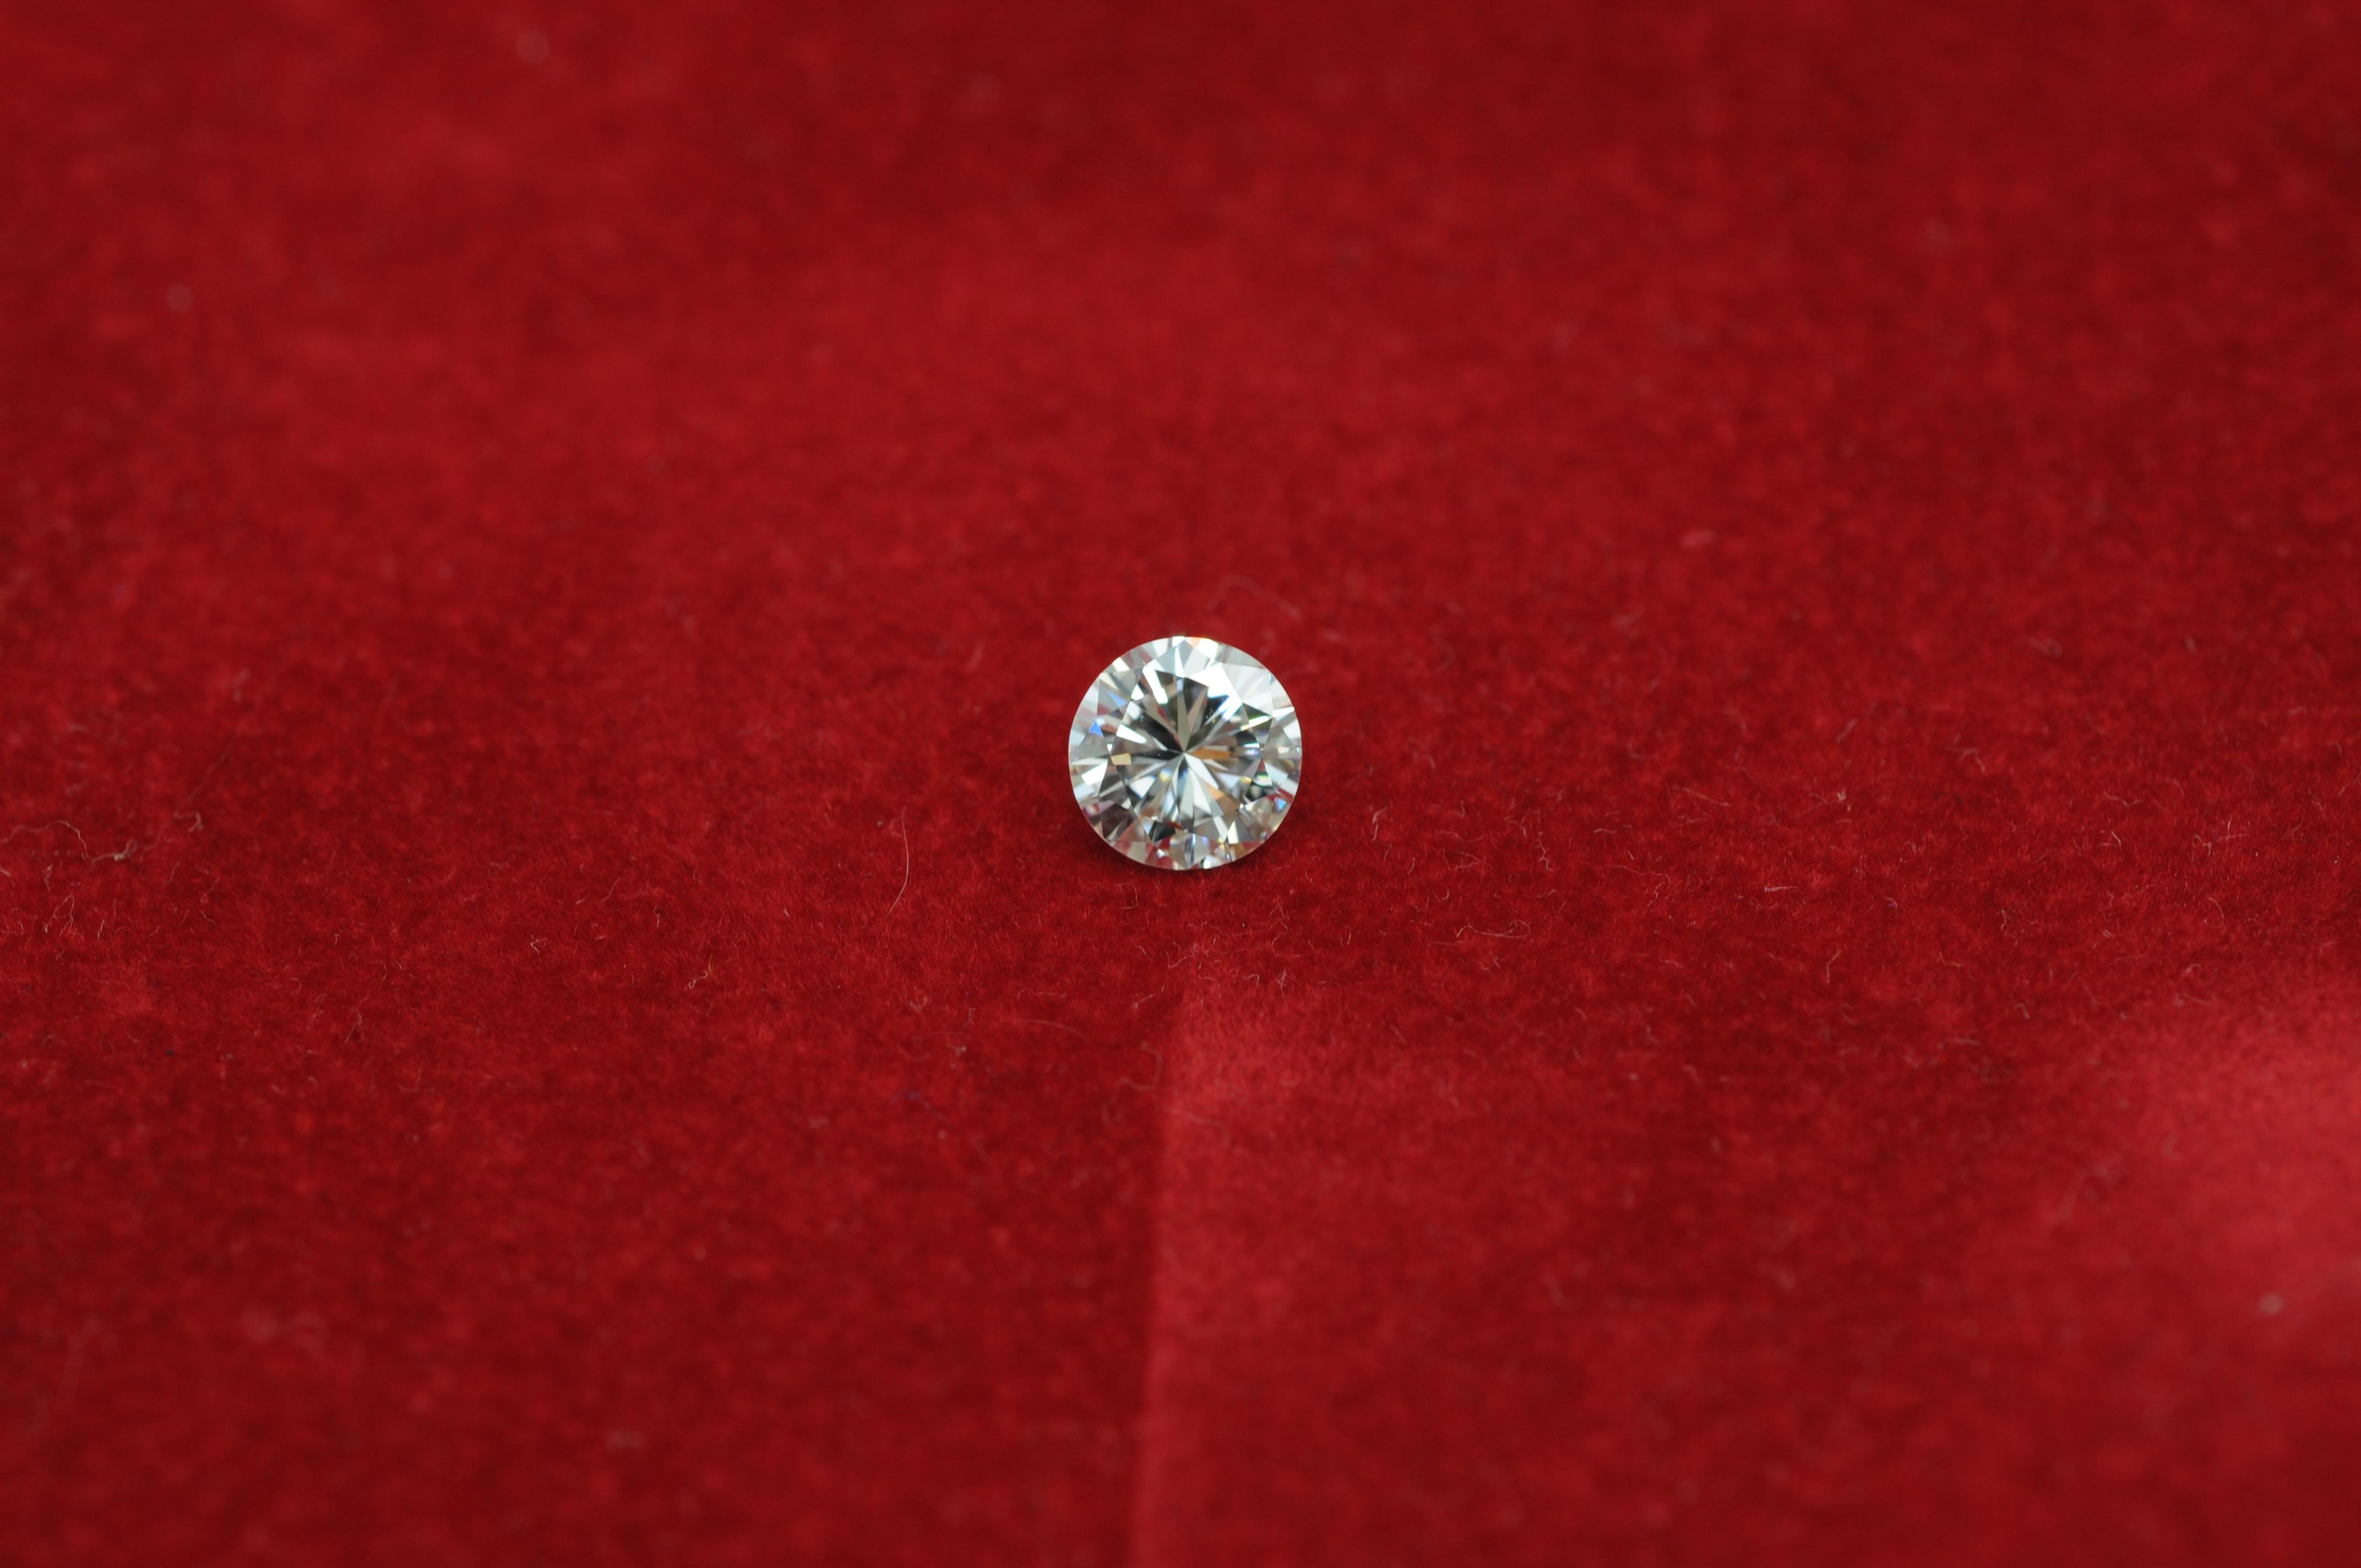  Diamond clarity:(IF) internally flawless color: top wesselton 1.06ct For Sale 8